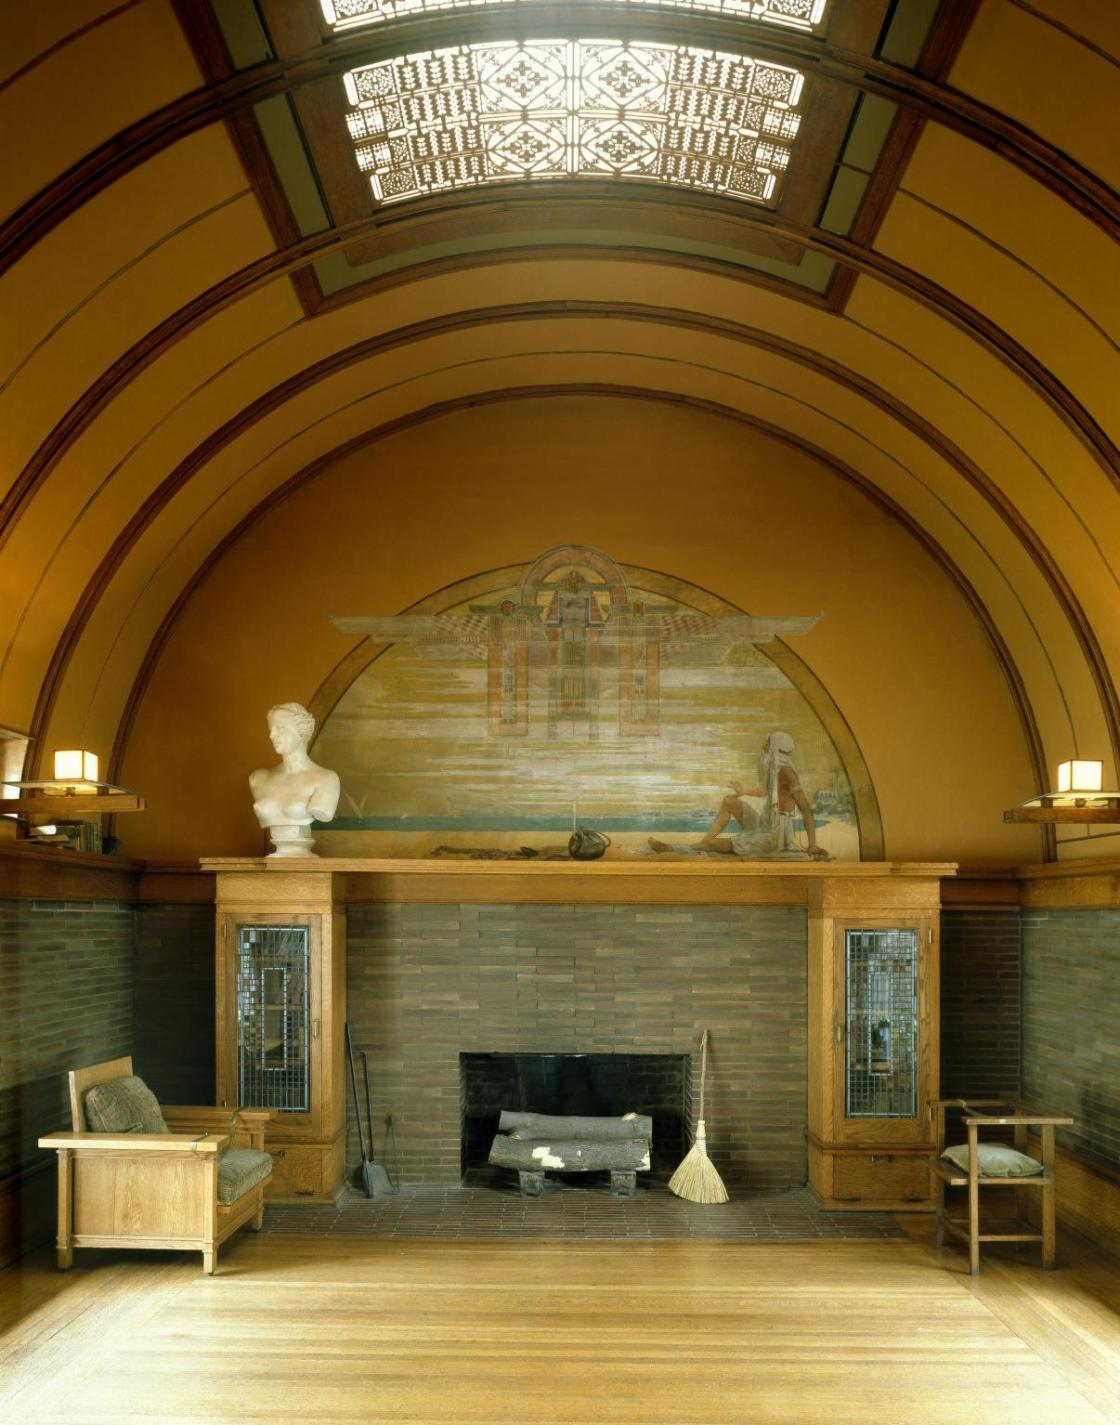 Photograph of the interior of the playroom at Frank Lloyd Wright's Oak Park studio and home